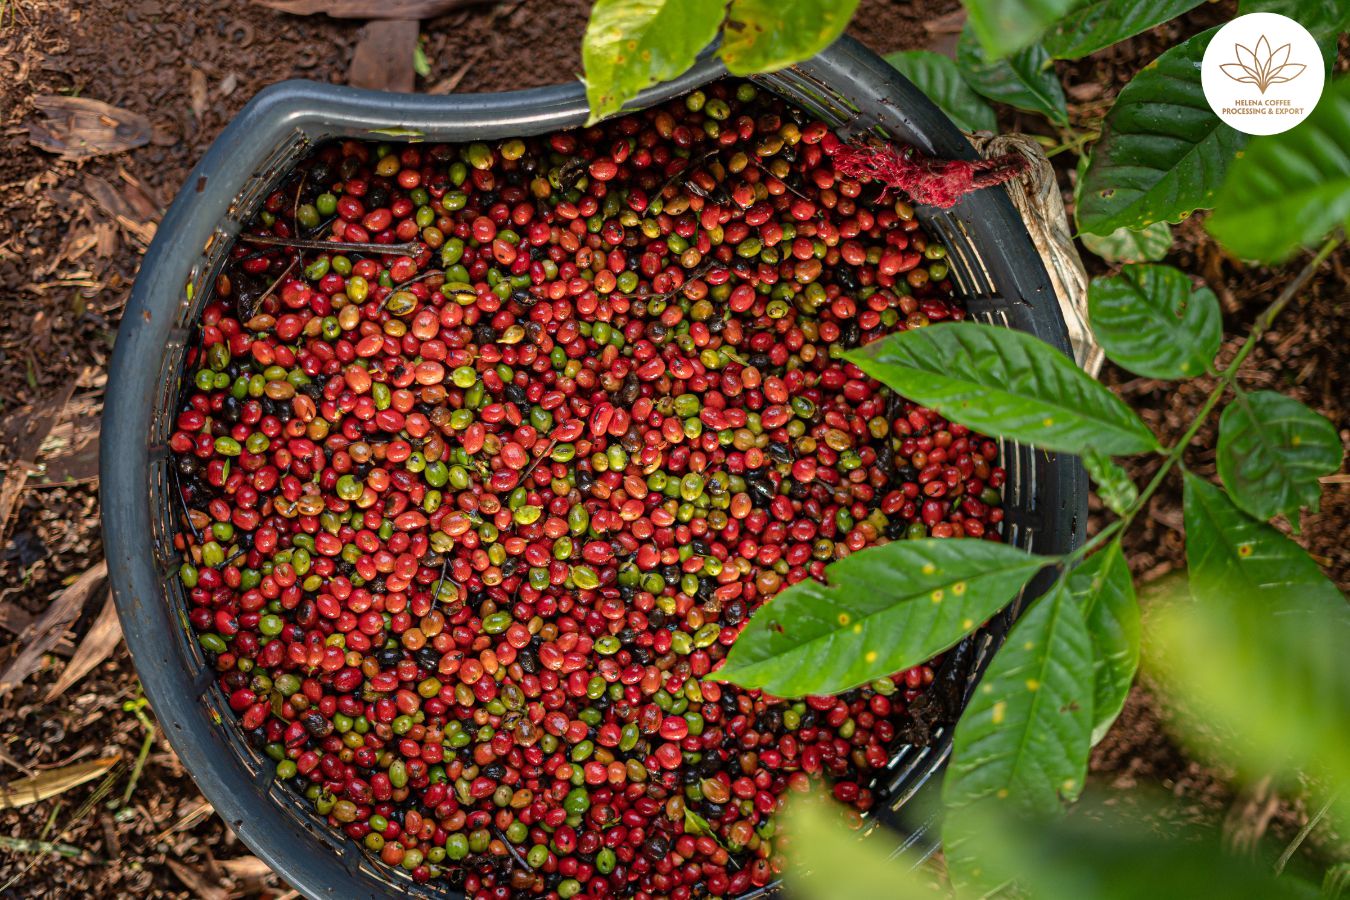 Top Robusta clean producing countries